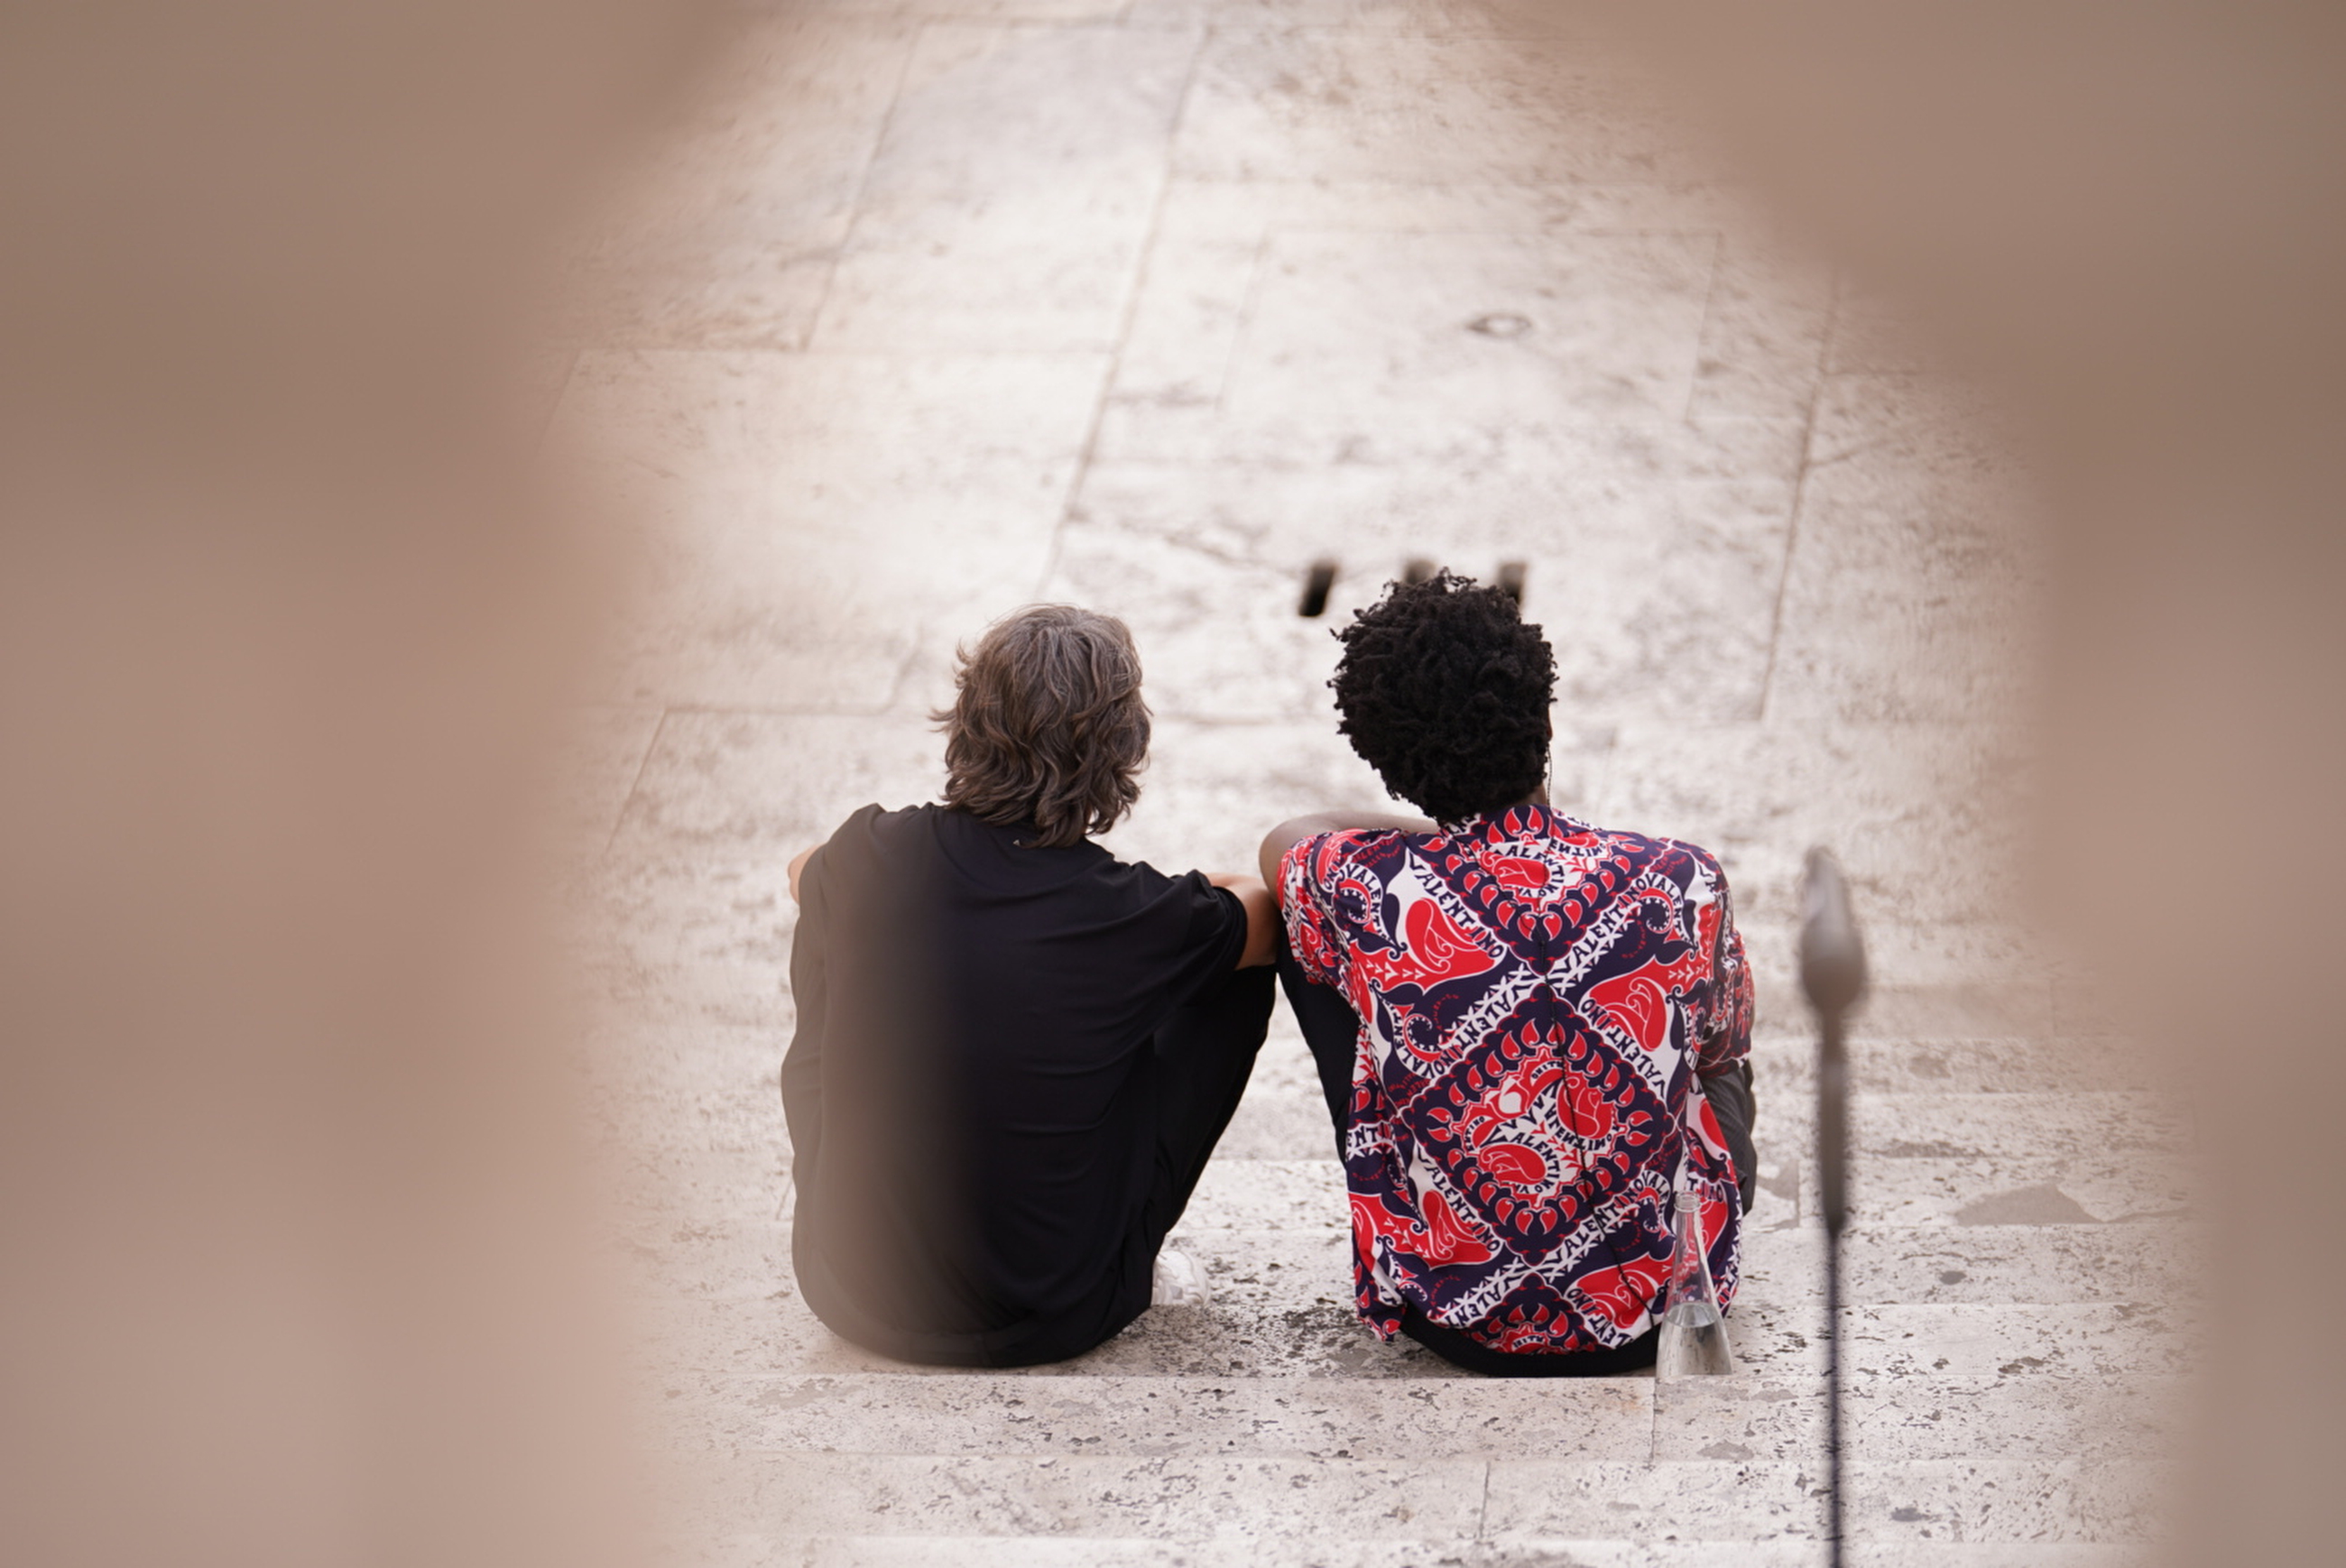 the producer Labrinth and Pierpaolo Piccioli sitting on the spanish steps in Rome – shot from behind